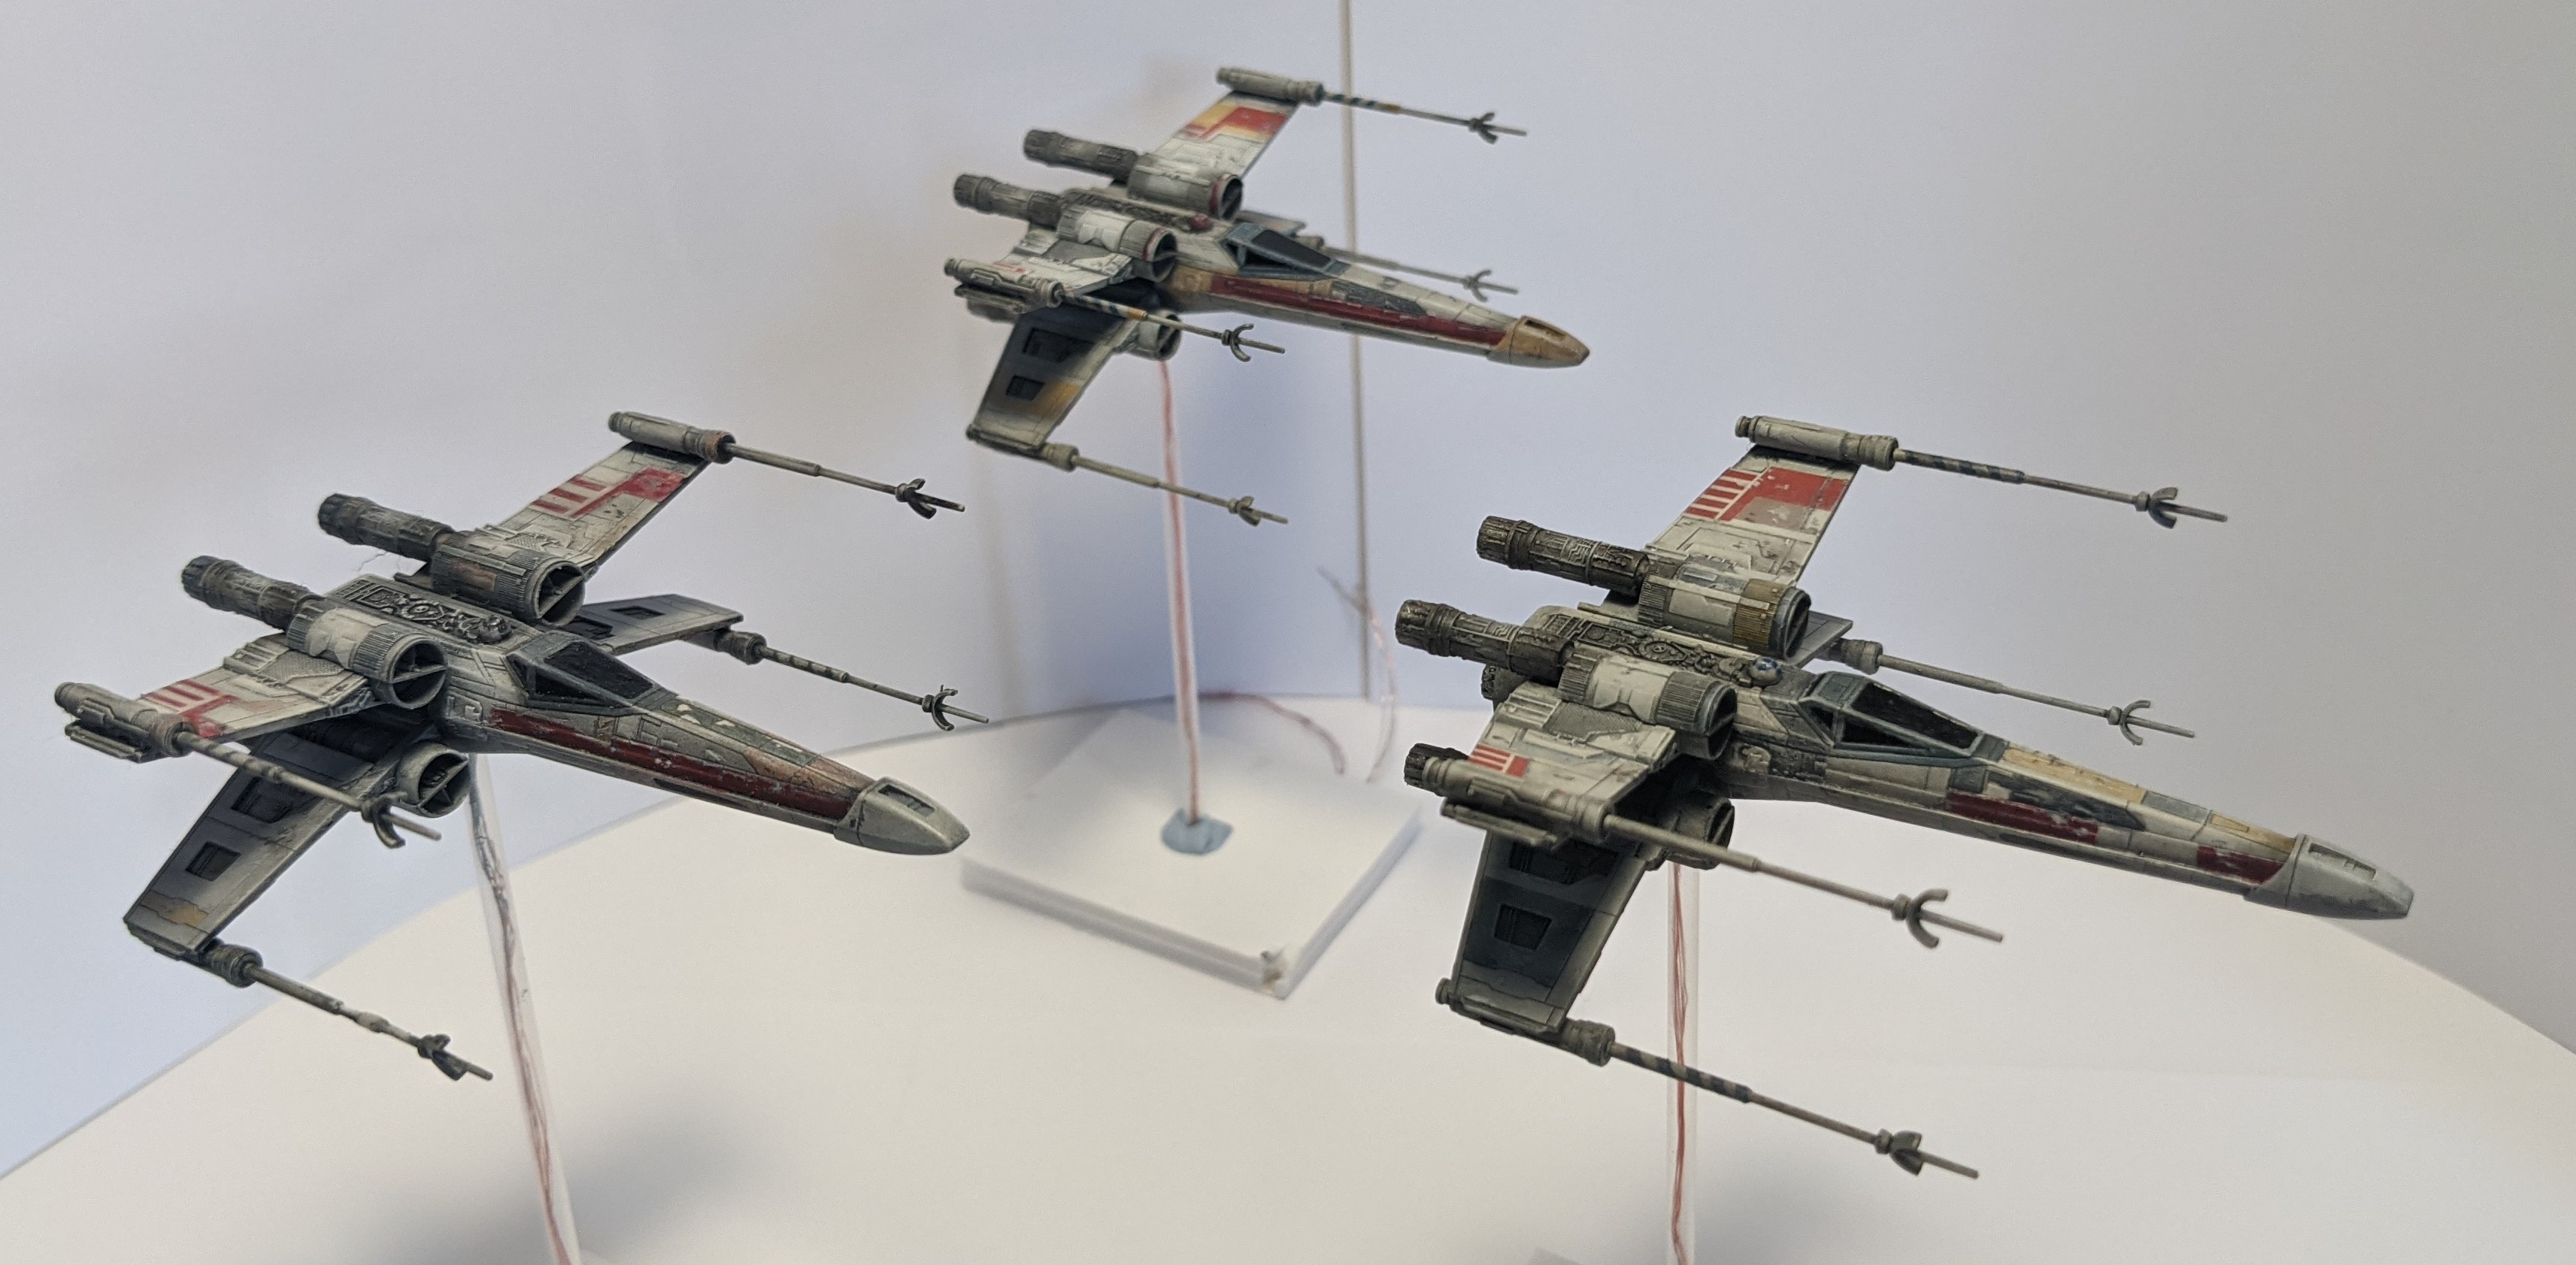 15 - Red 5, 2 and 3 standing by.jpg